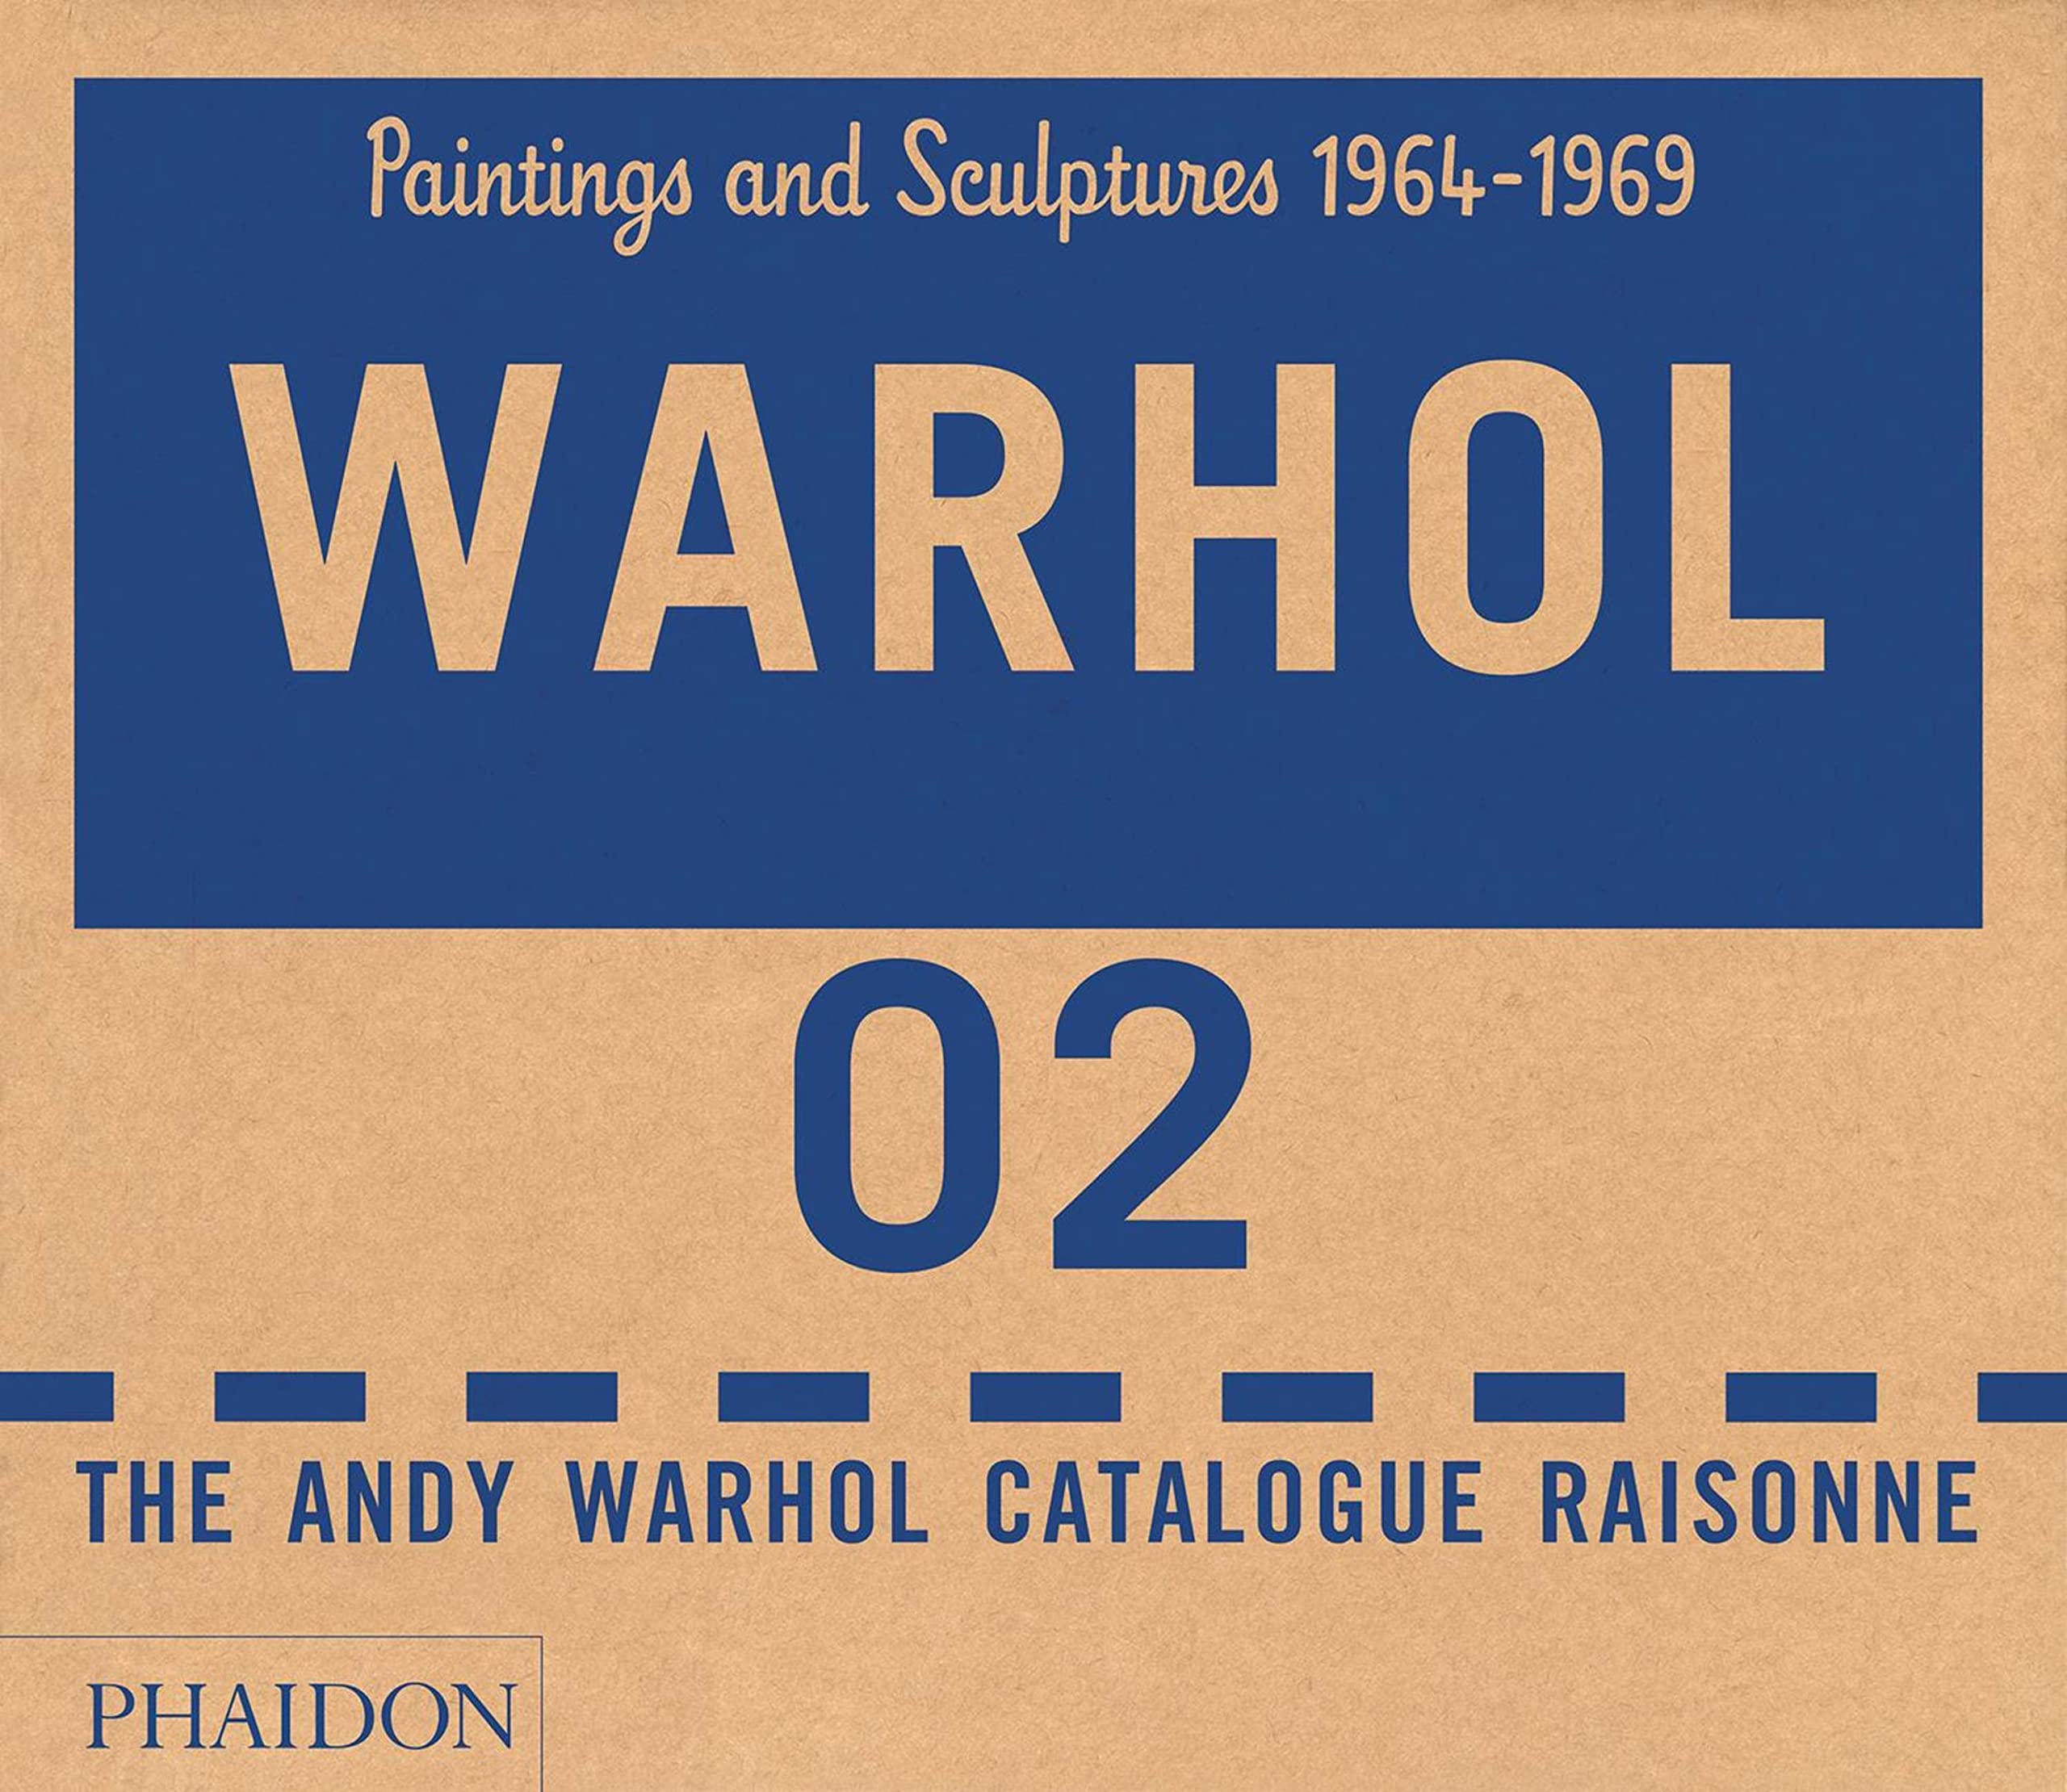 Warhol: Paintings and Sculpture 1964-1969, Vol. 2 (2 Vol. Set): The Andy Warhol Catalogue Raisonne